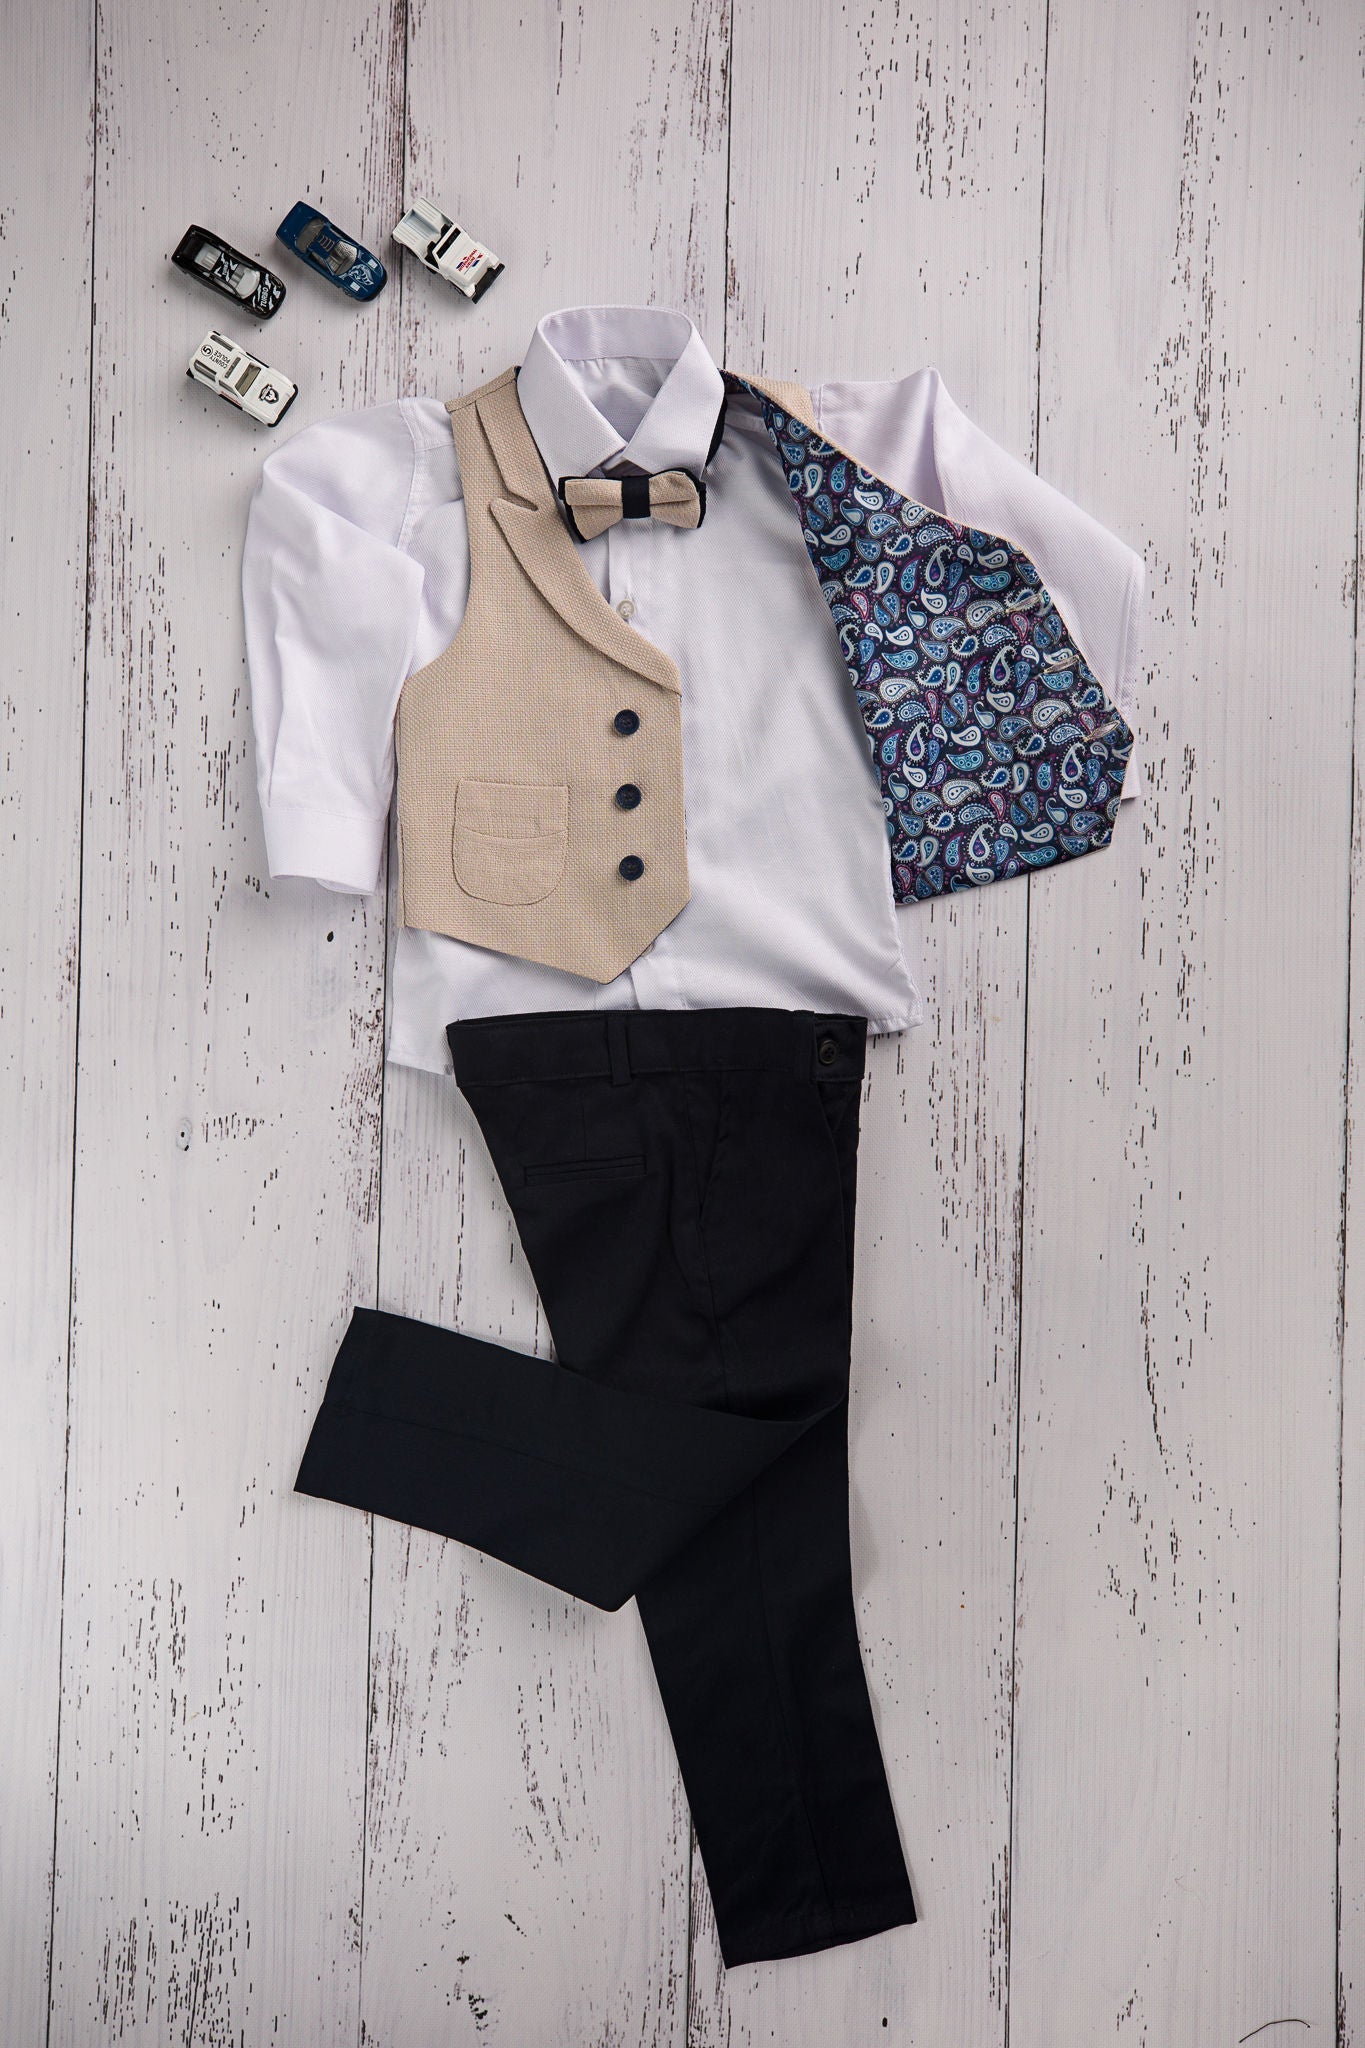 Waistcoat, Shirt, Trousers and Bow Tie